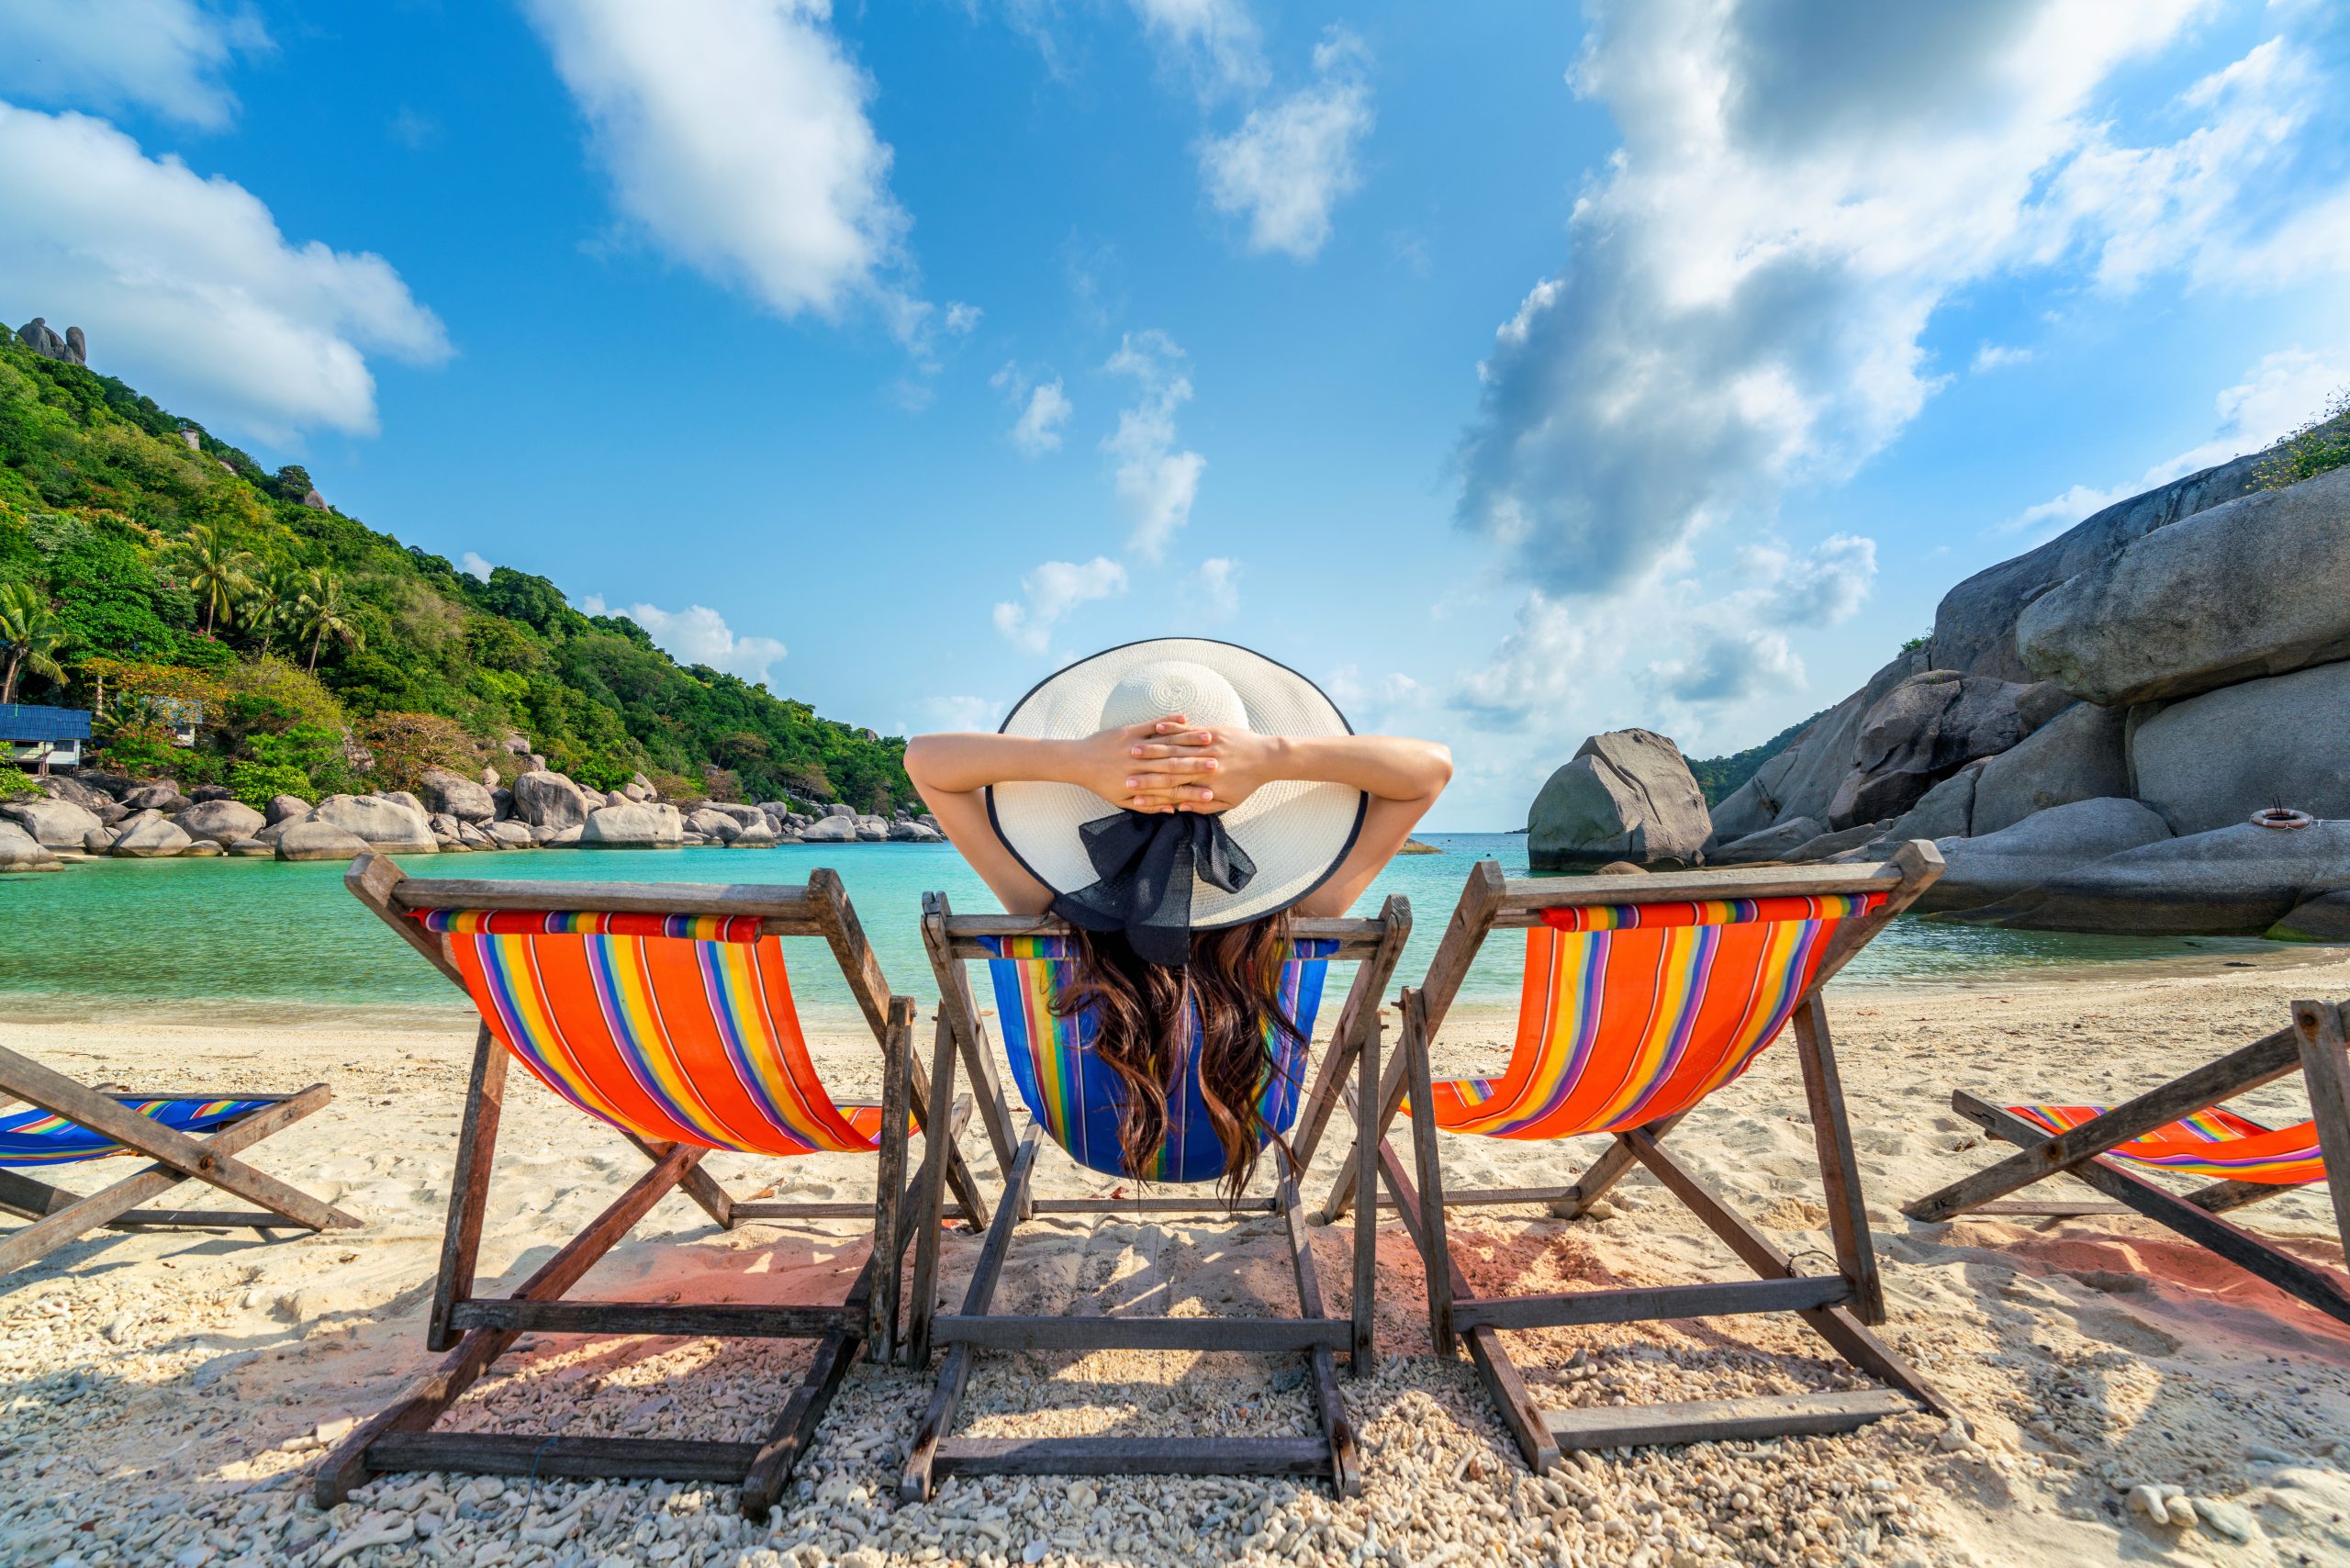 Woman with hat sitting on chairs beach in beautiful tropical bea